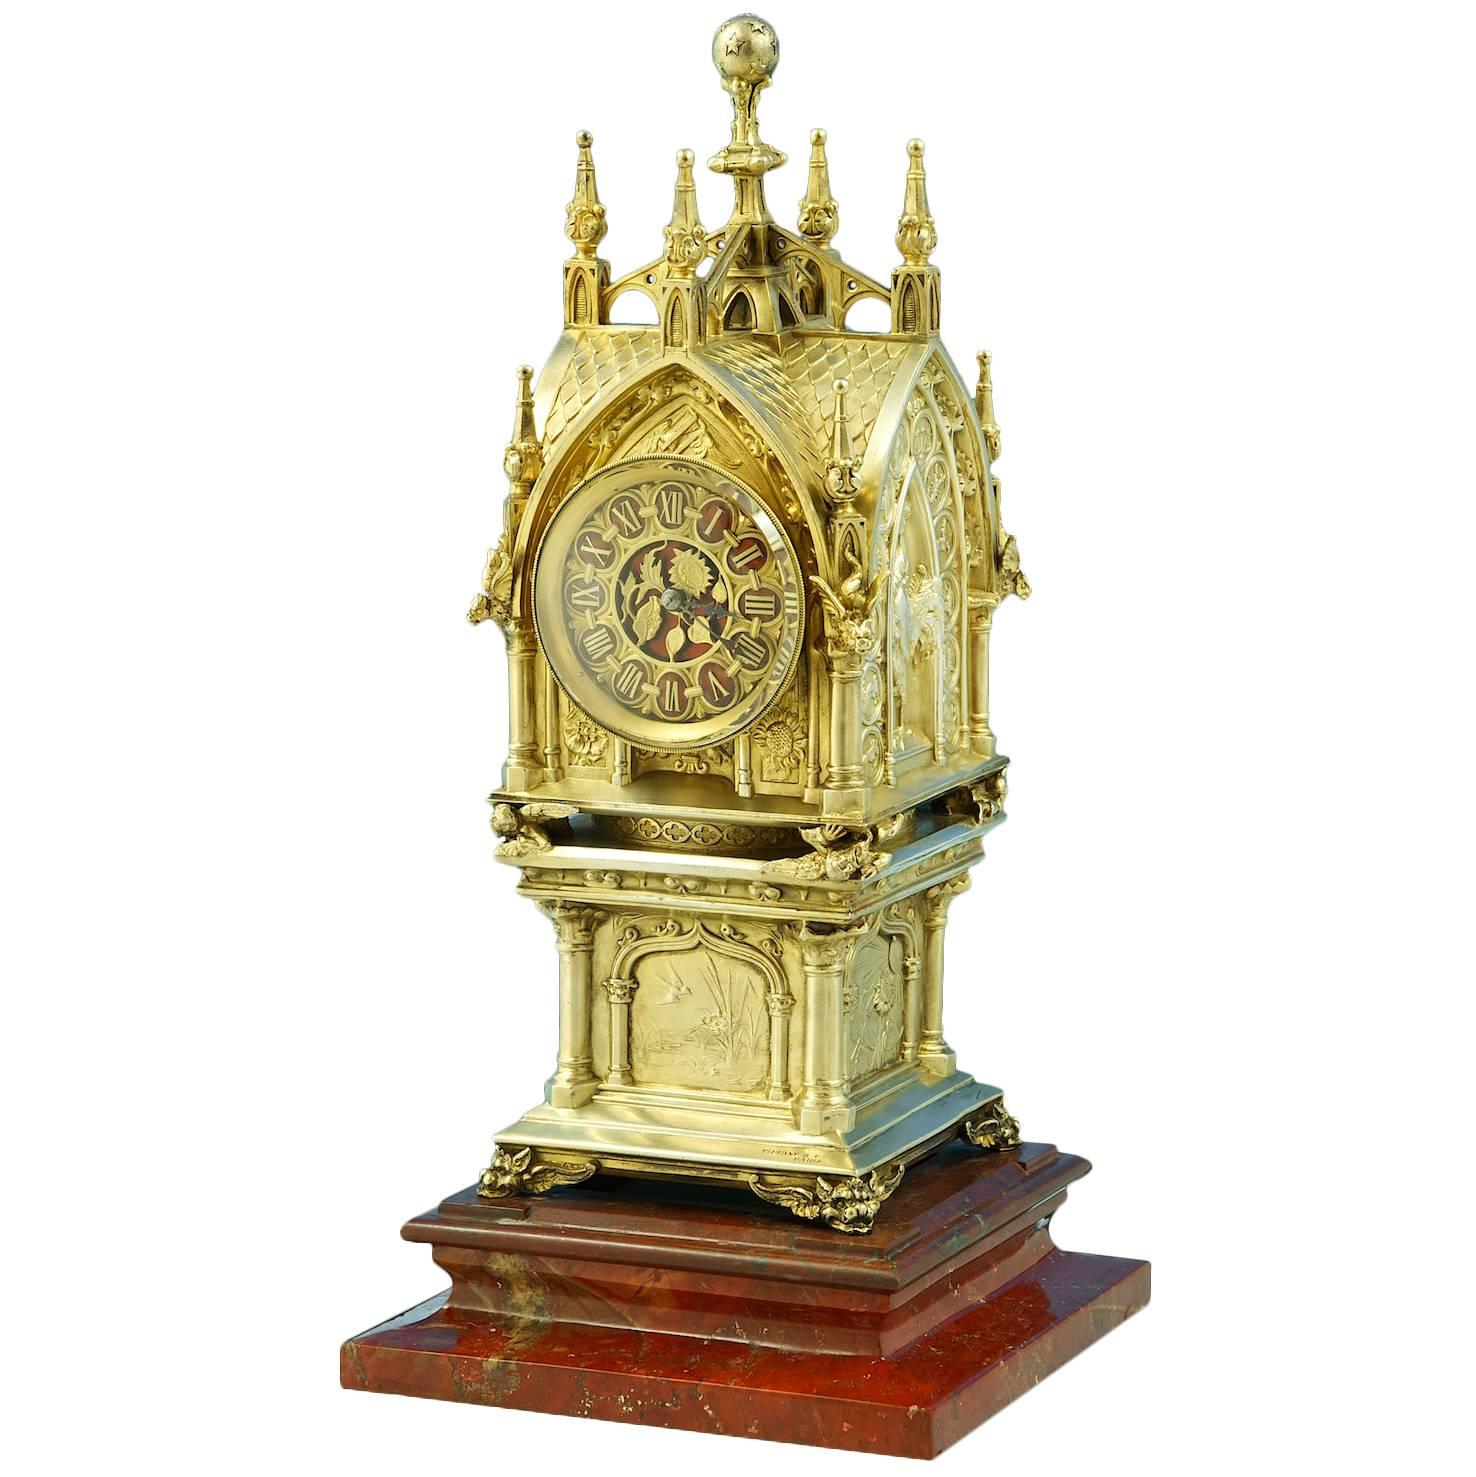 Tiffany & Co a Magnificent Gothic Revival Mantle Clock For Sale